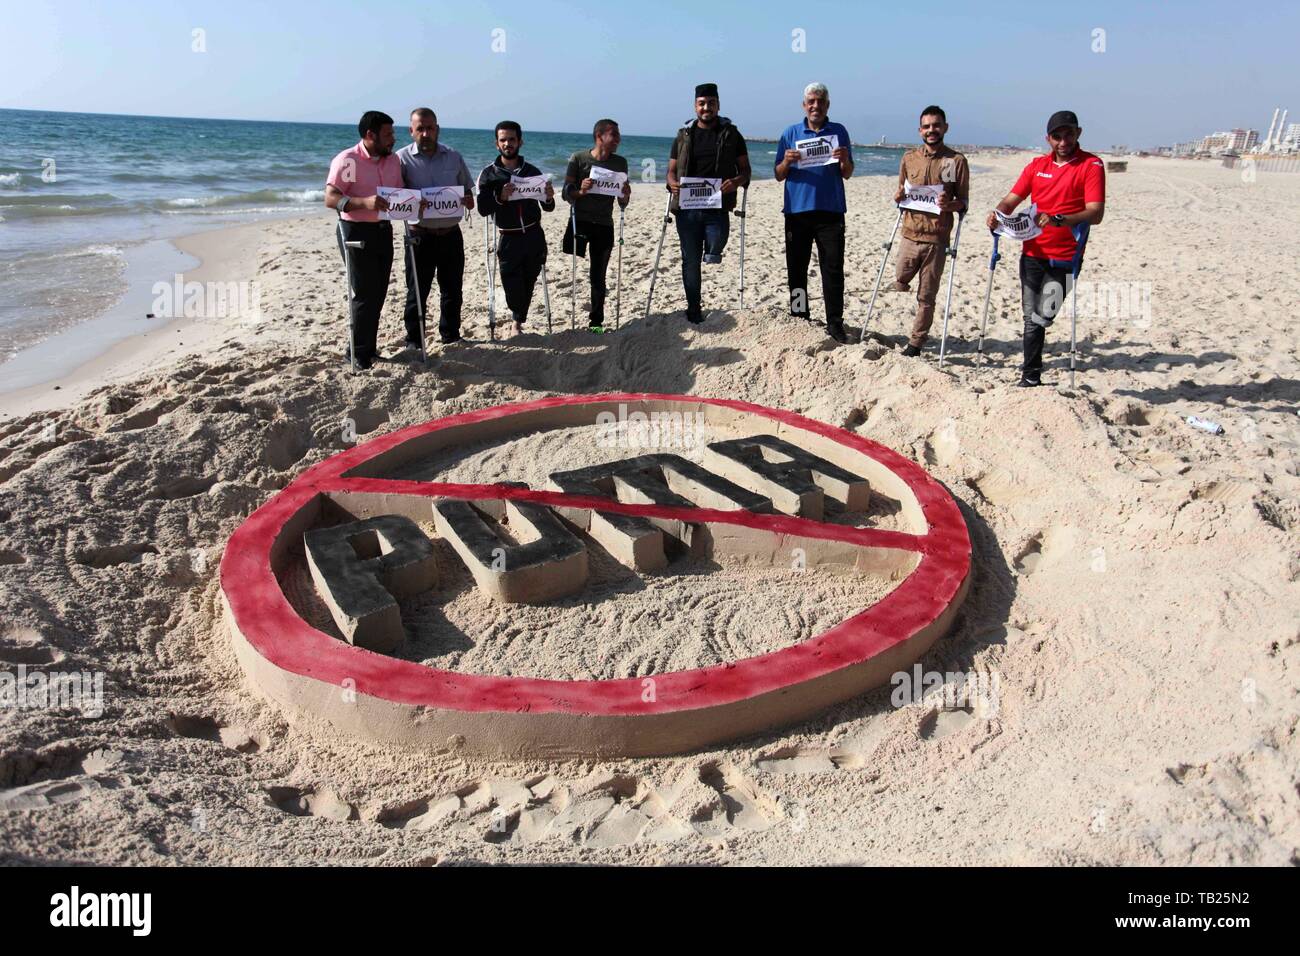 May 29, 2019 - Gaza City, Gaza Strip, Palestinian Territory - Wounded Palestinians, who were lose their legs during the clashes with Israeli troops, stand in front a sand draw during a protest calling to boycott Puma sport company, on the beach of Gaza city on May 29, 2019. Puma is the main sponsor of the Israel Football Association (IFA), which includes teams in Israelâ€™s illegal settlements on occupied Palestinian land  (Credit Image: © Mahmoud Ajjour/APA Images via ZUMA Wire) Stock Photo